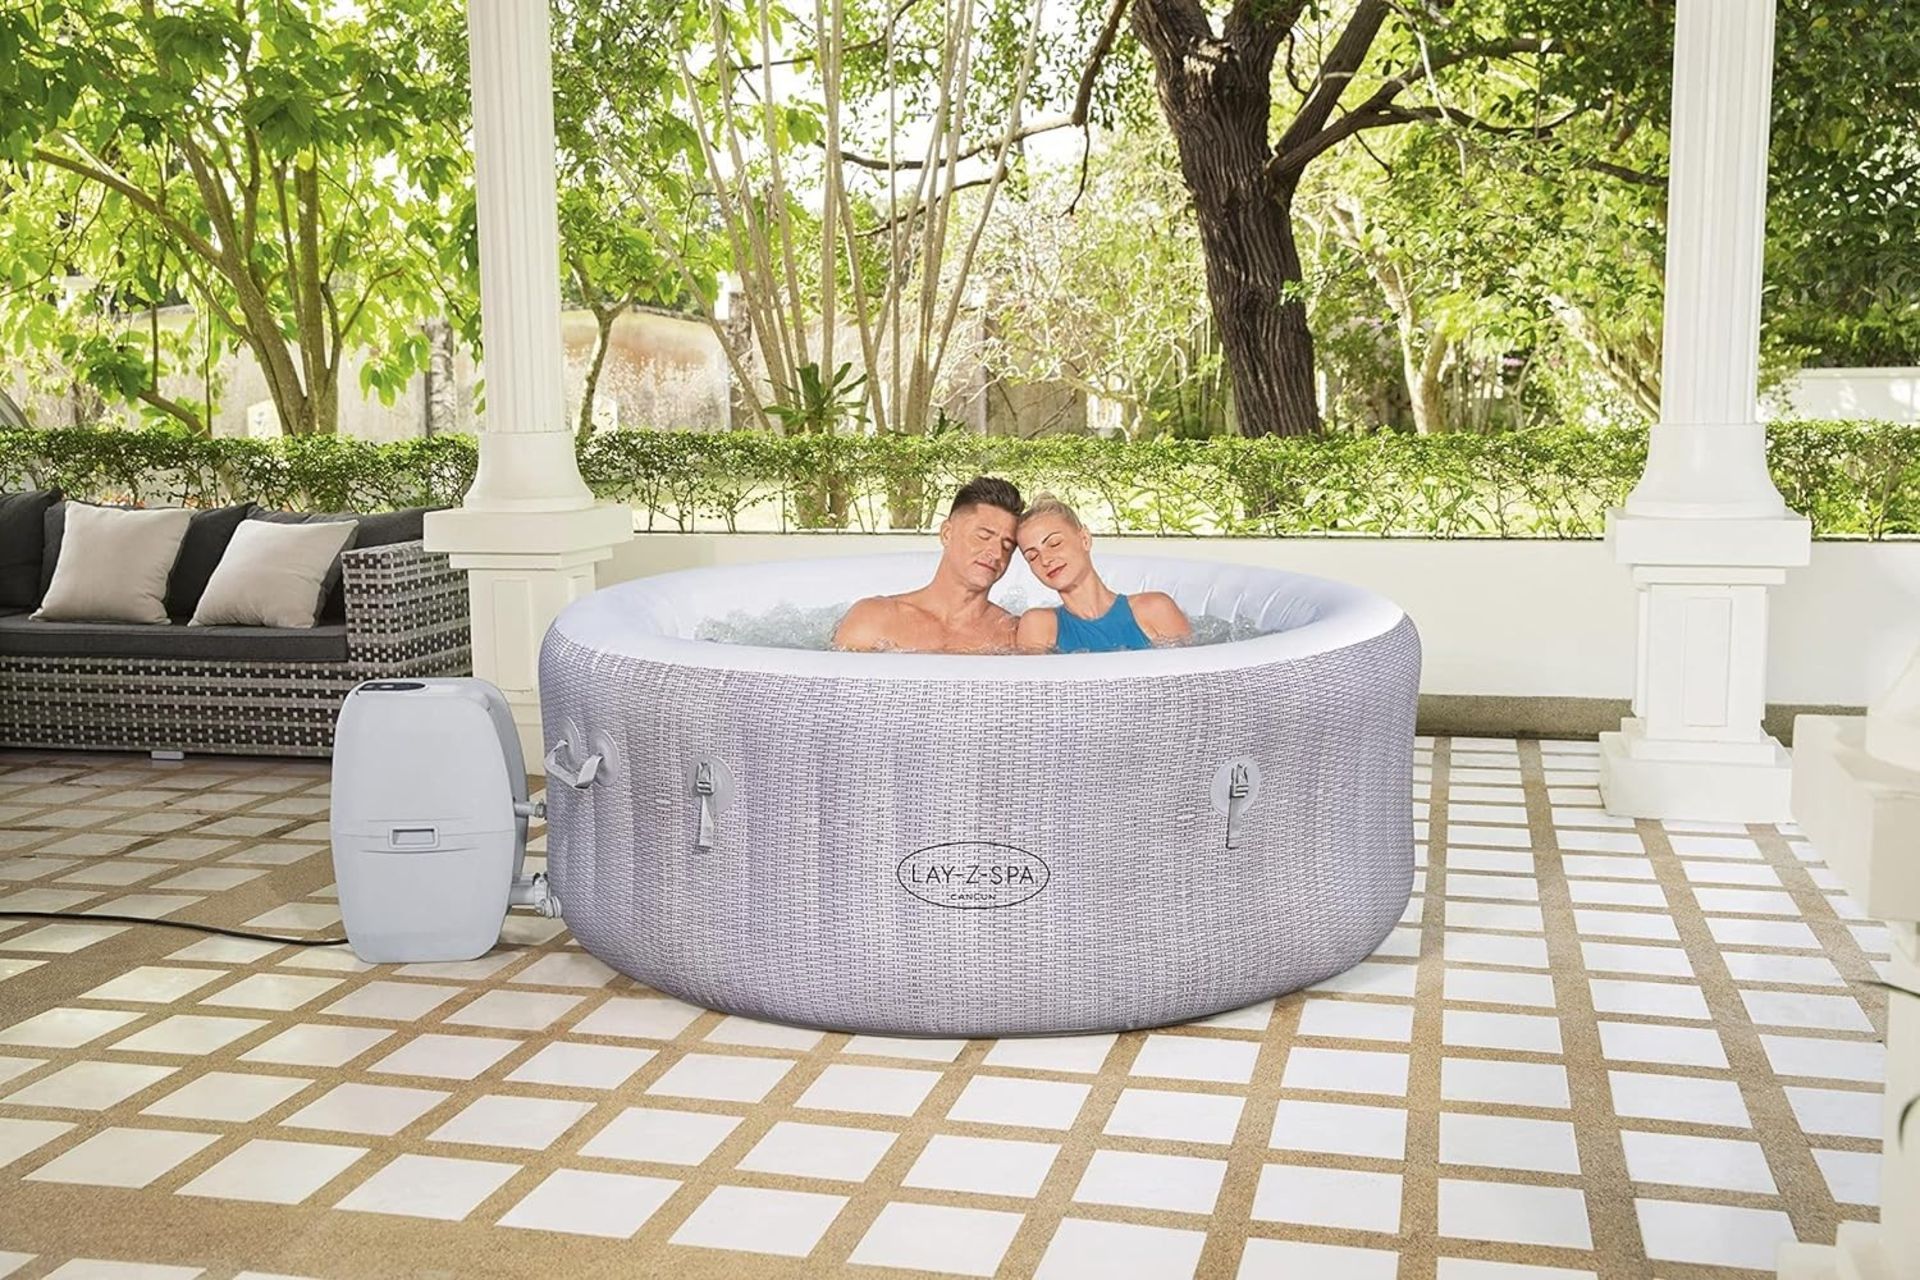 RRP £529.99 - Lay-Z-Spa Cancun Hot Tub, 120 AirJet Rattan Design Inflatable Spa with Freeze Shield